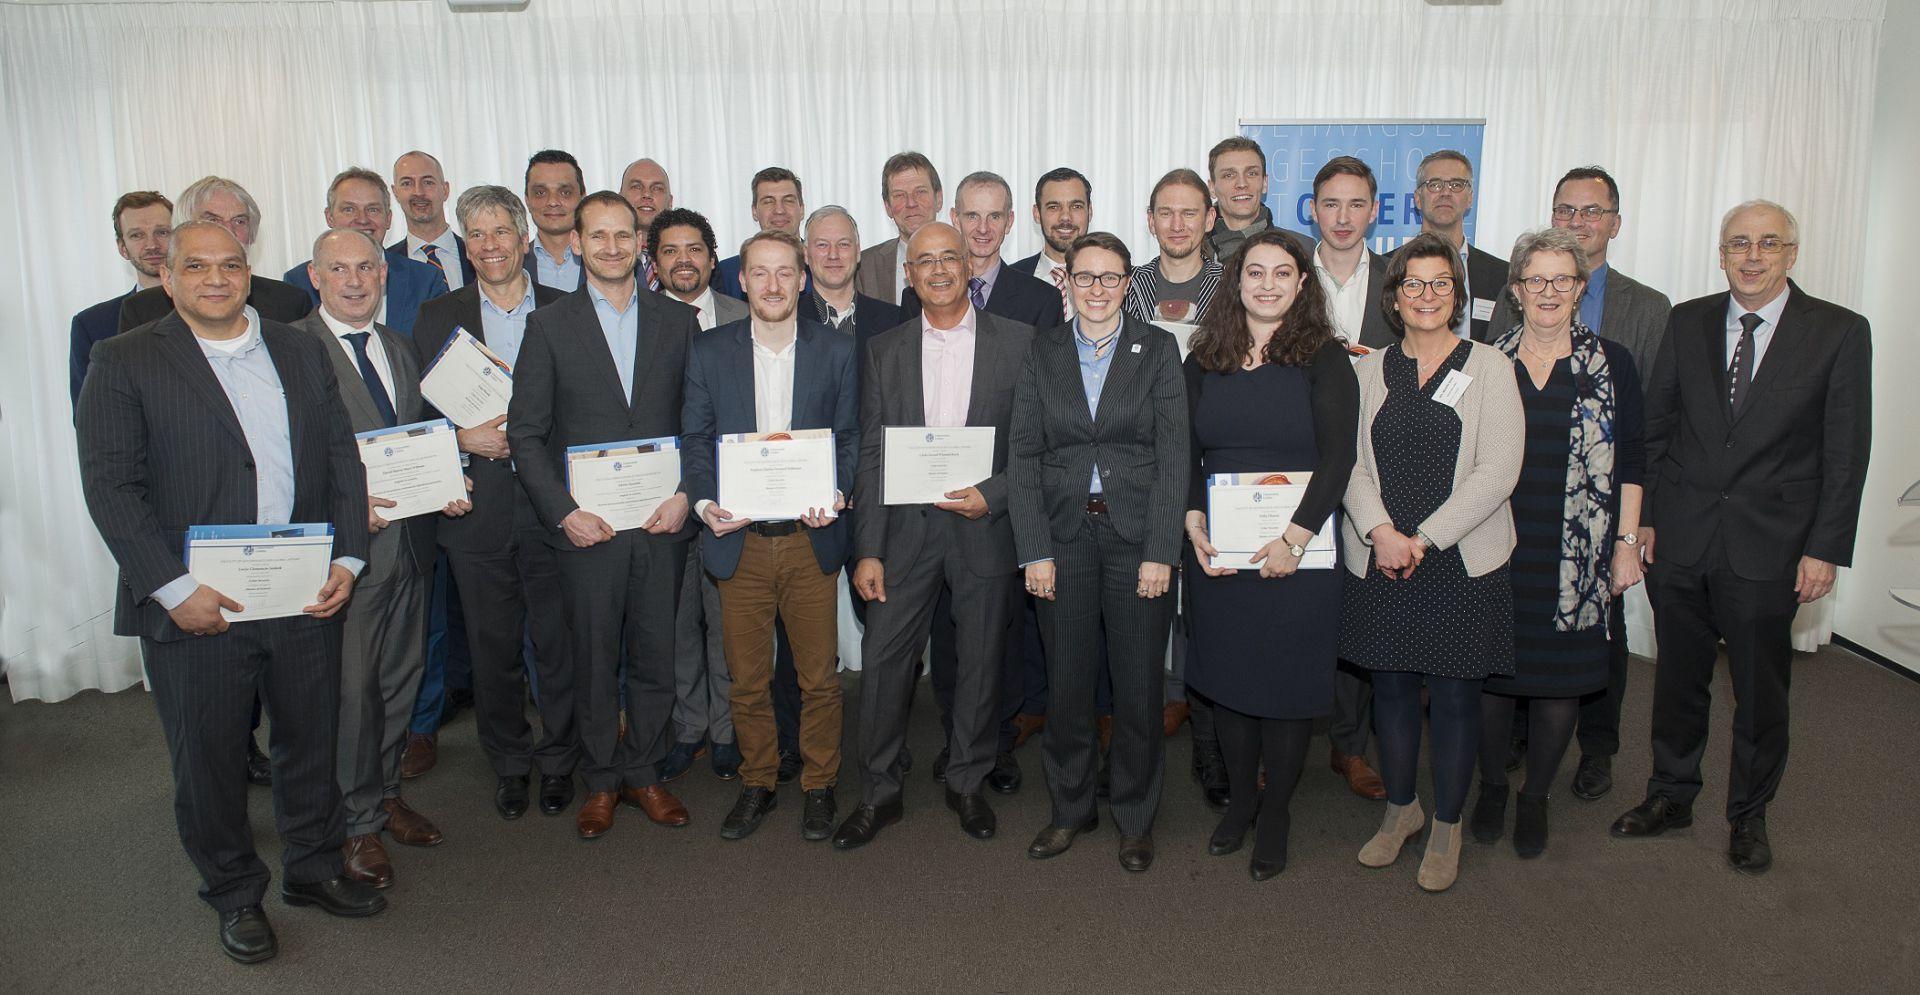 First Executive Master Programme Cyber Security Students Graduating